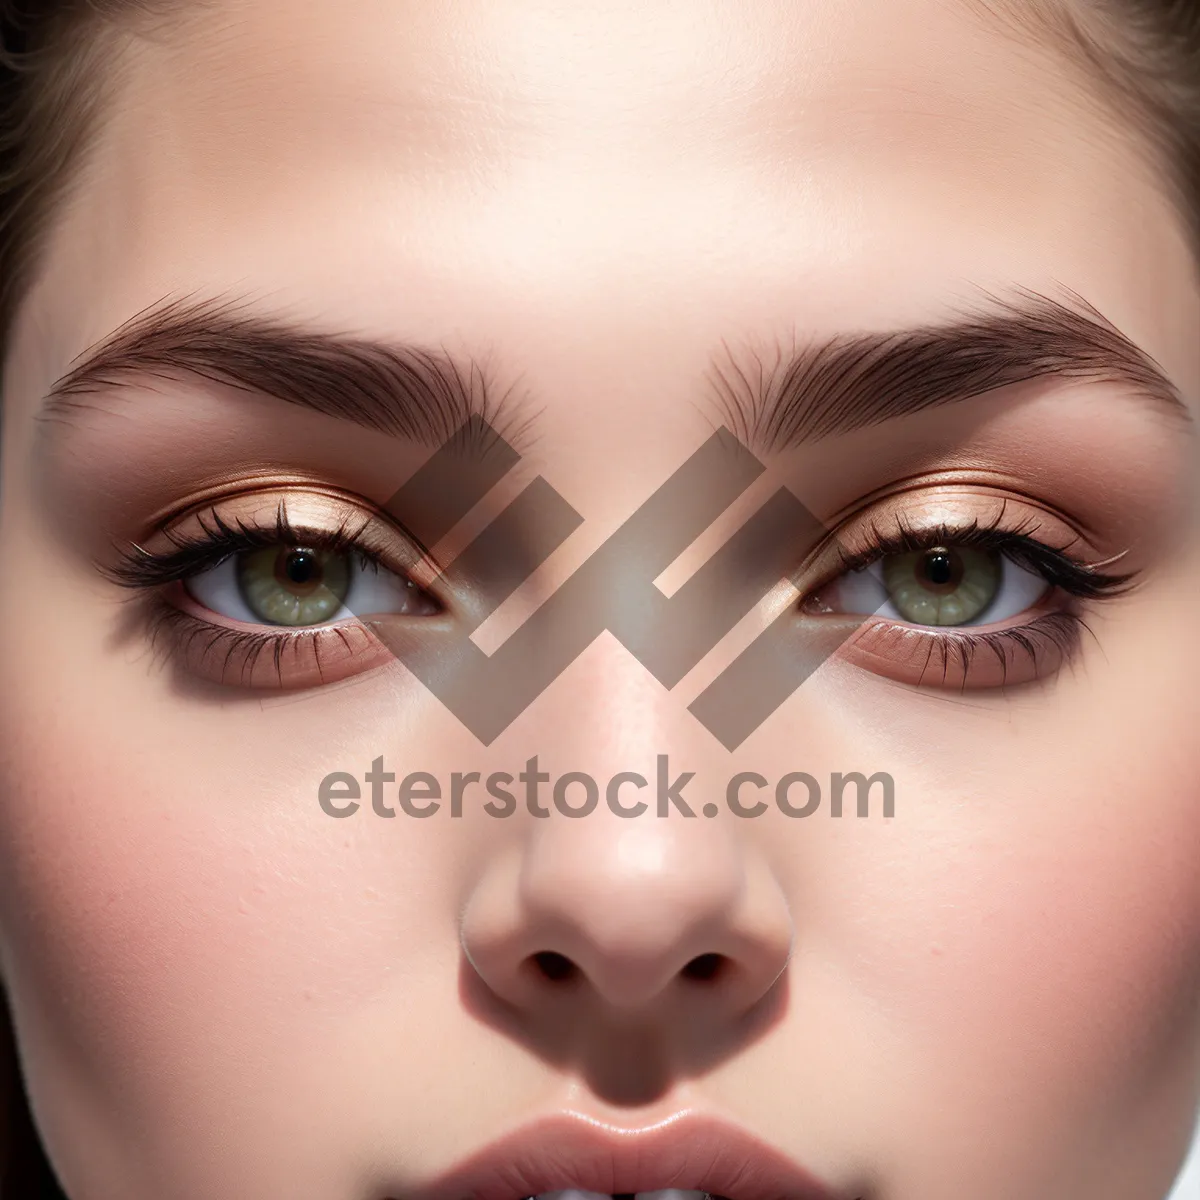 Picture of Radiant Beauty: Sensual Closeup of a Lovely Model's Face